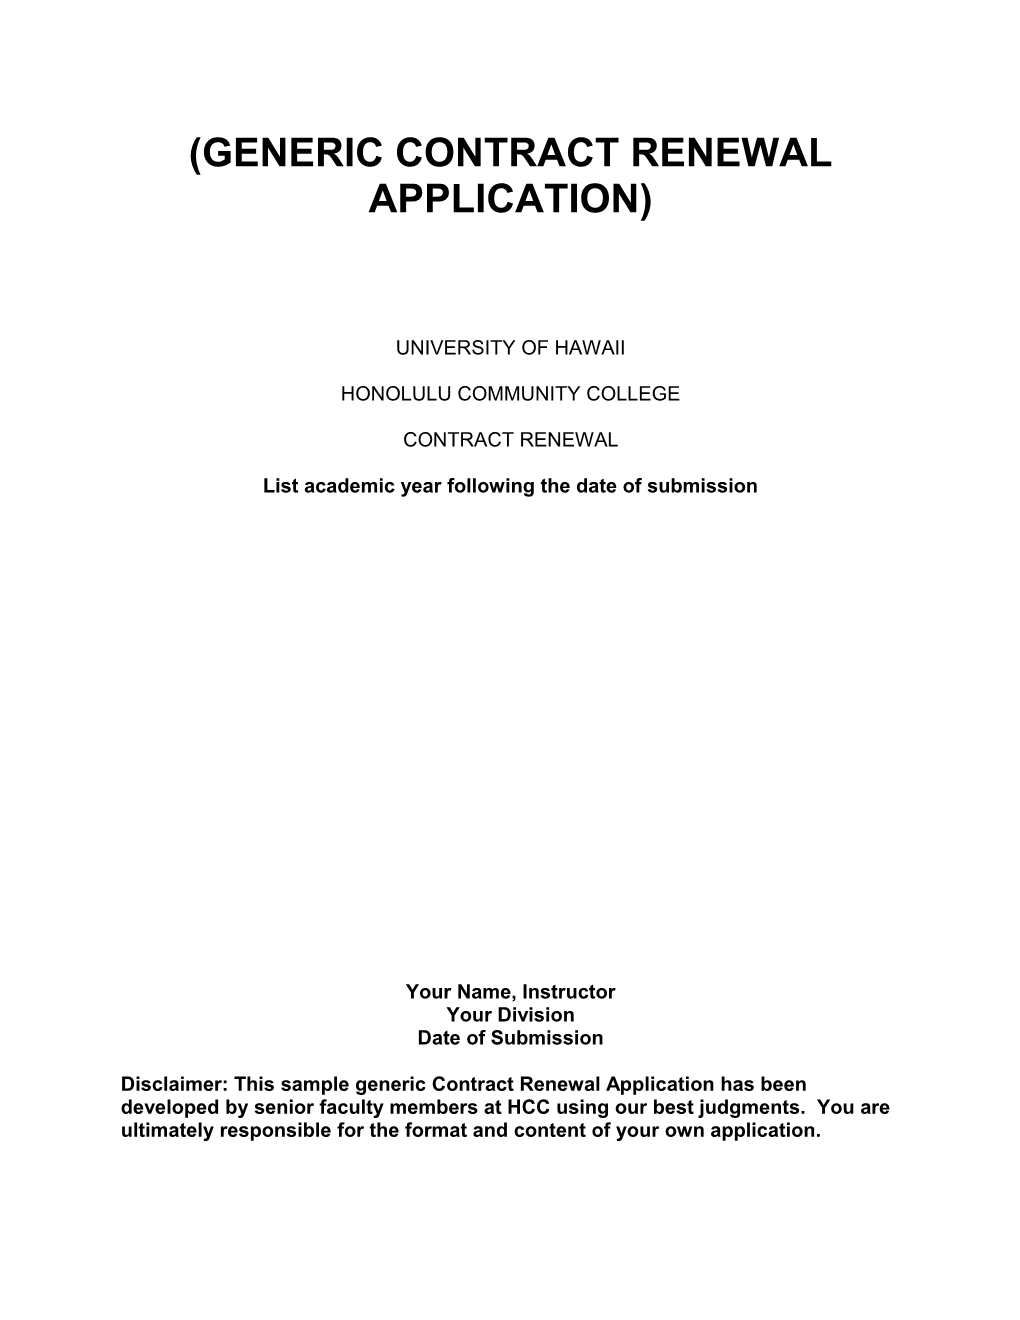 Generic Contract Renewal Application